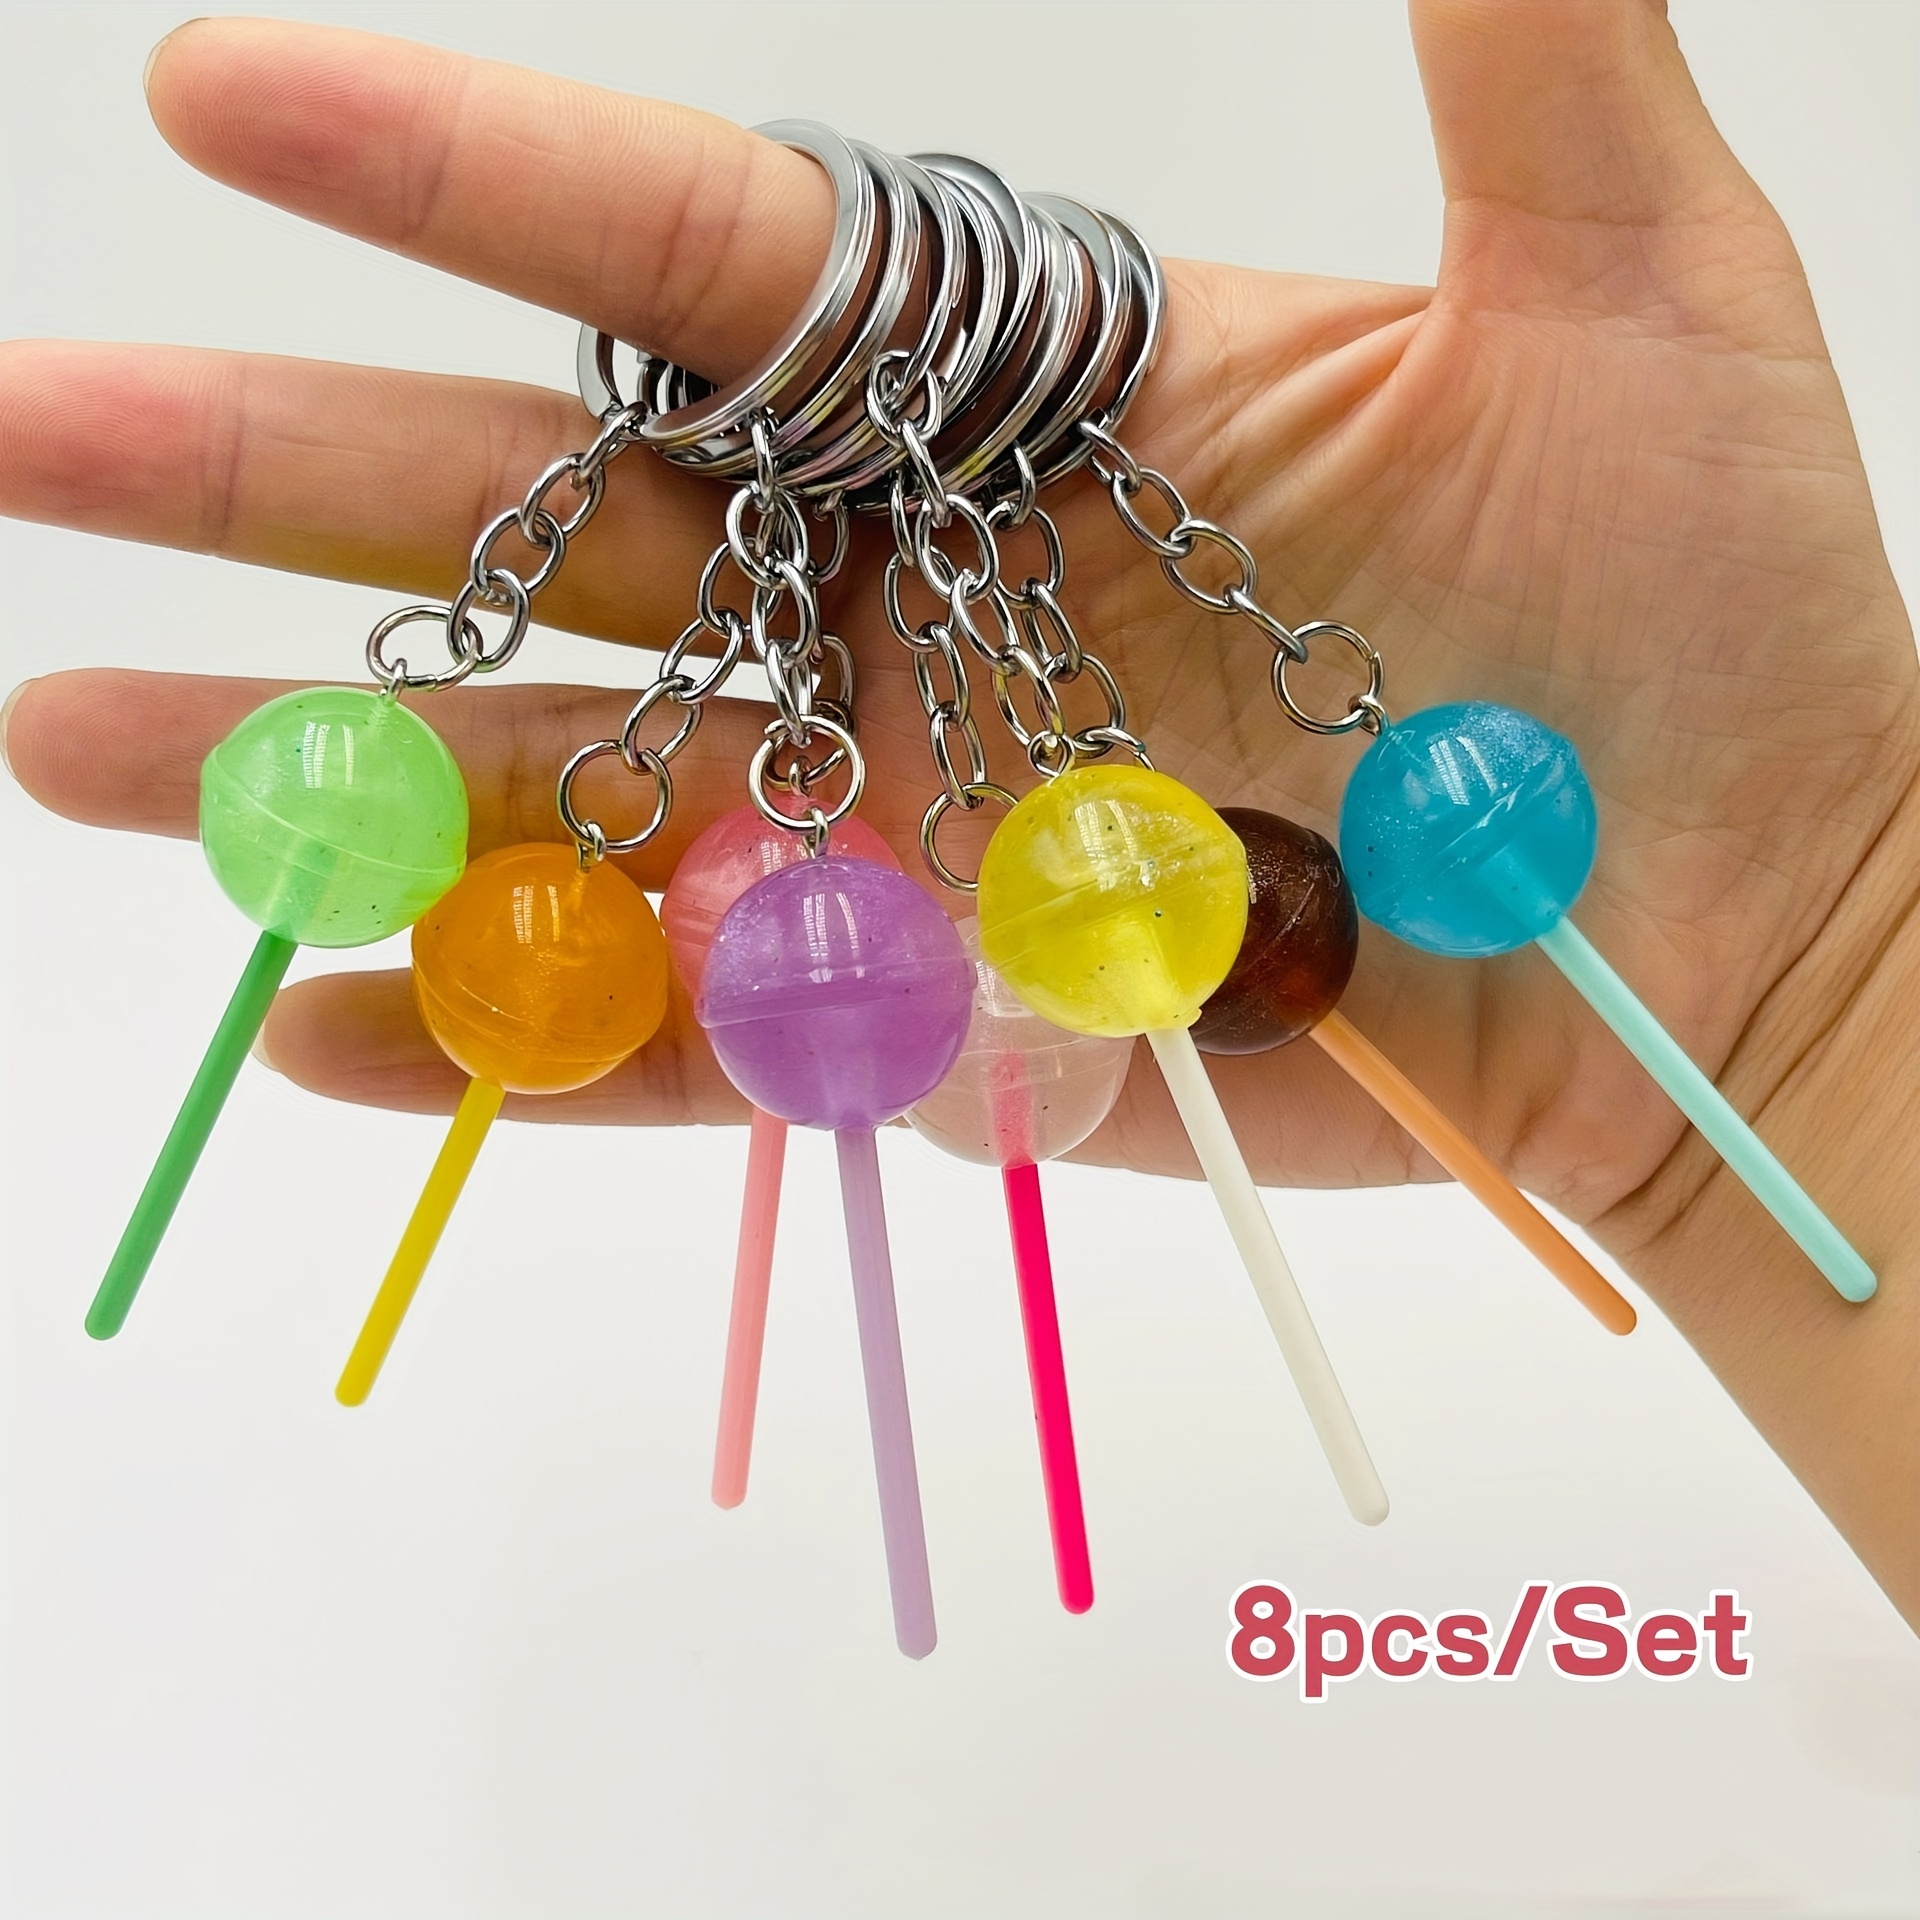 

8pcs/set Simulation Lollipop Keychain Candy Color Glow-in-the-dark Resin Key Chain Ring Bag Backpack Charm Car Key Pendant Friends Gift